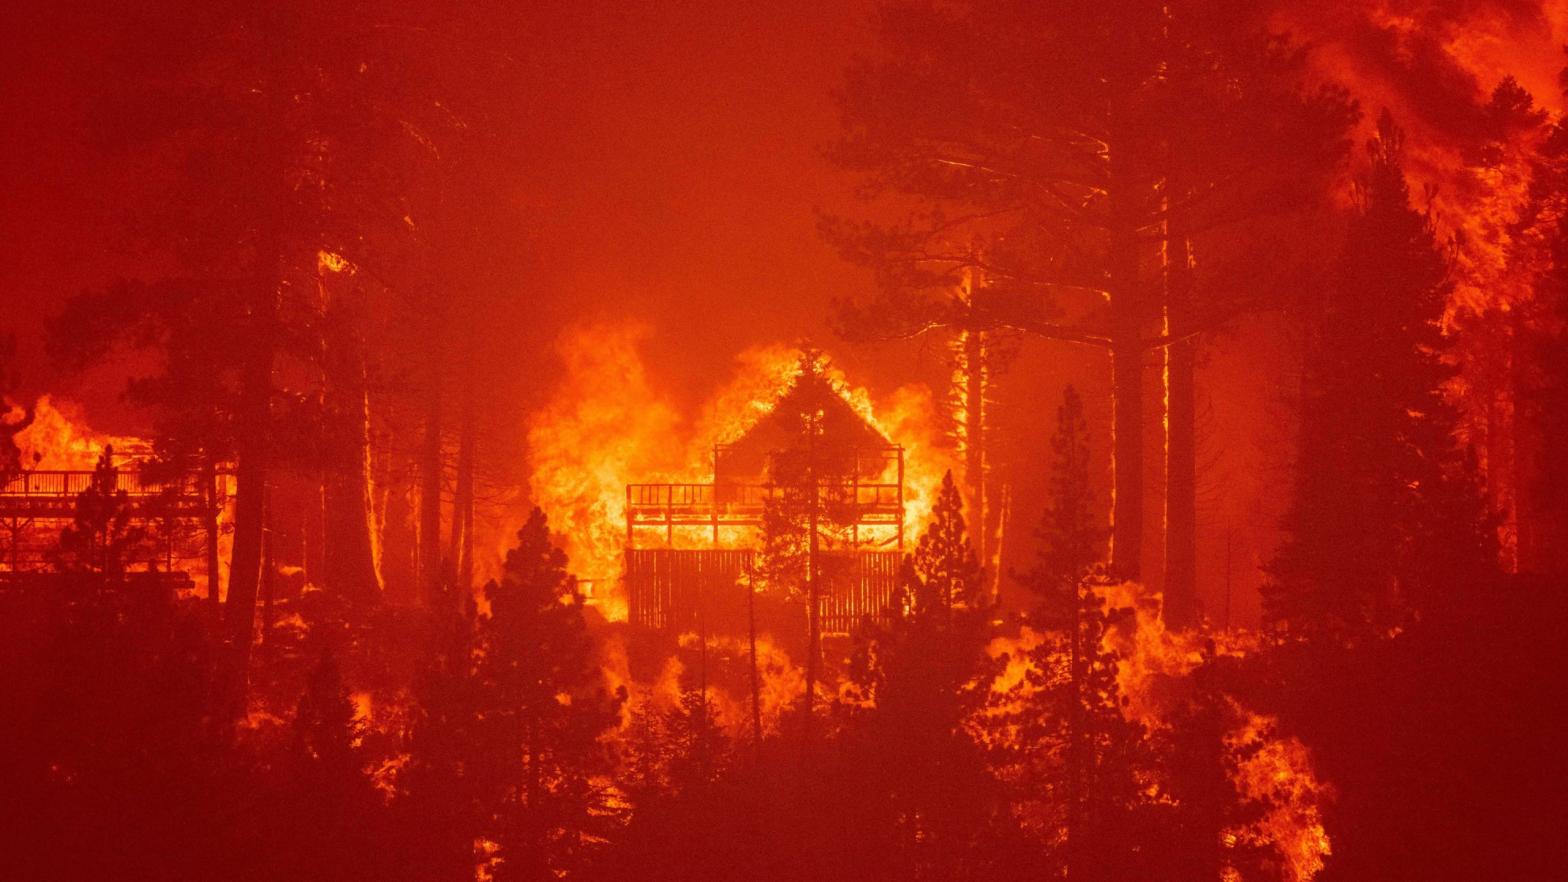 Flames consume multiple homes as the Caldor Fire pushes into the Echo Summit area near Lake Tahoe on Aug. 30, 2021. (Photo: Josh Edelson/AFP, Getty Images)